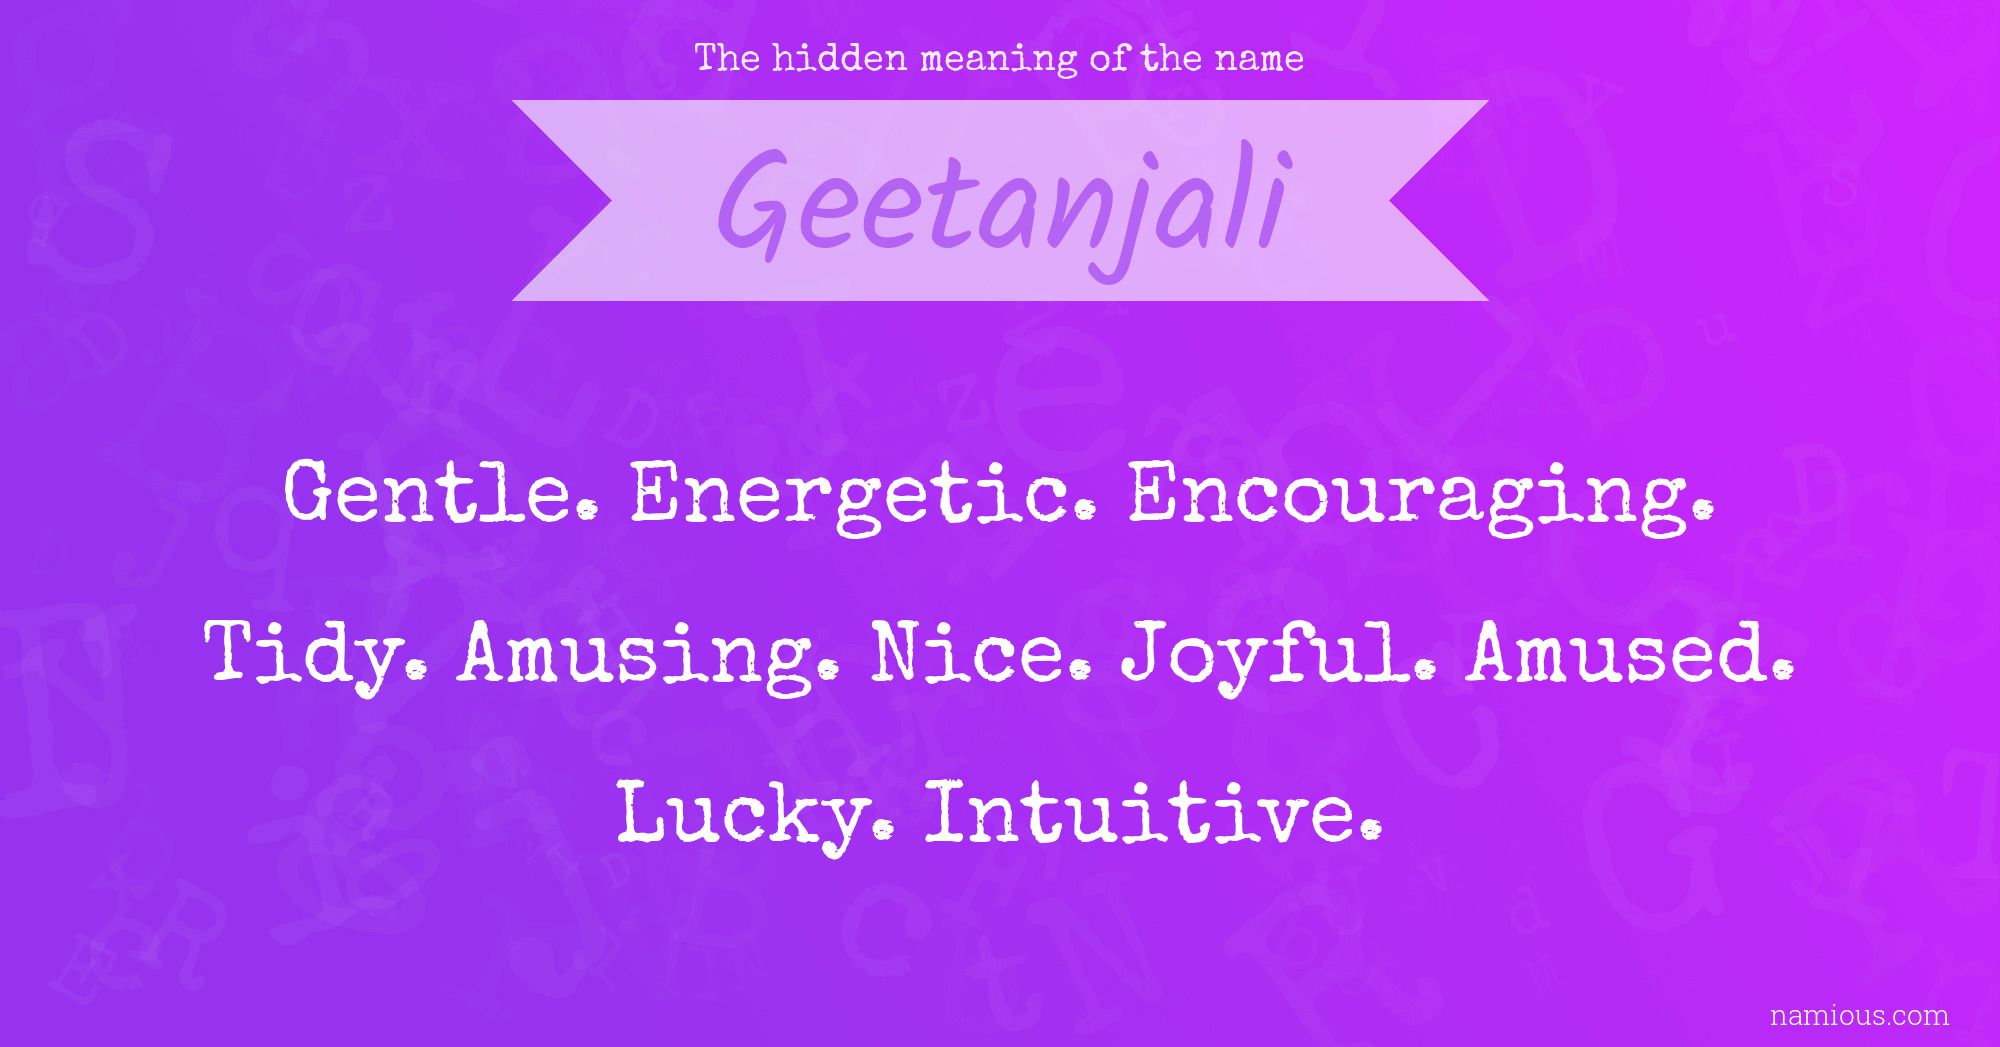 The hidden meaning of the name Geetanjali